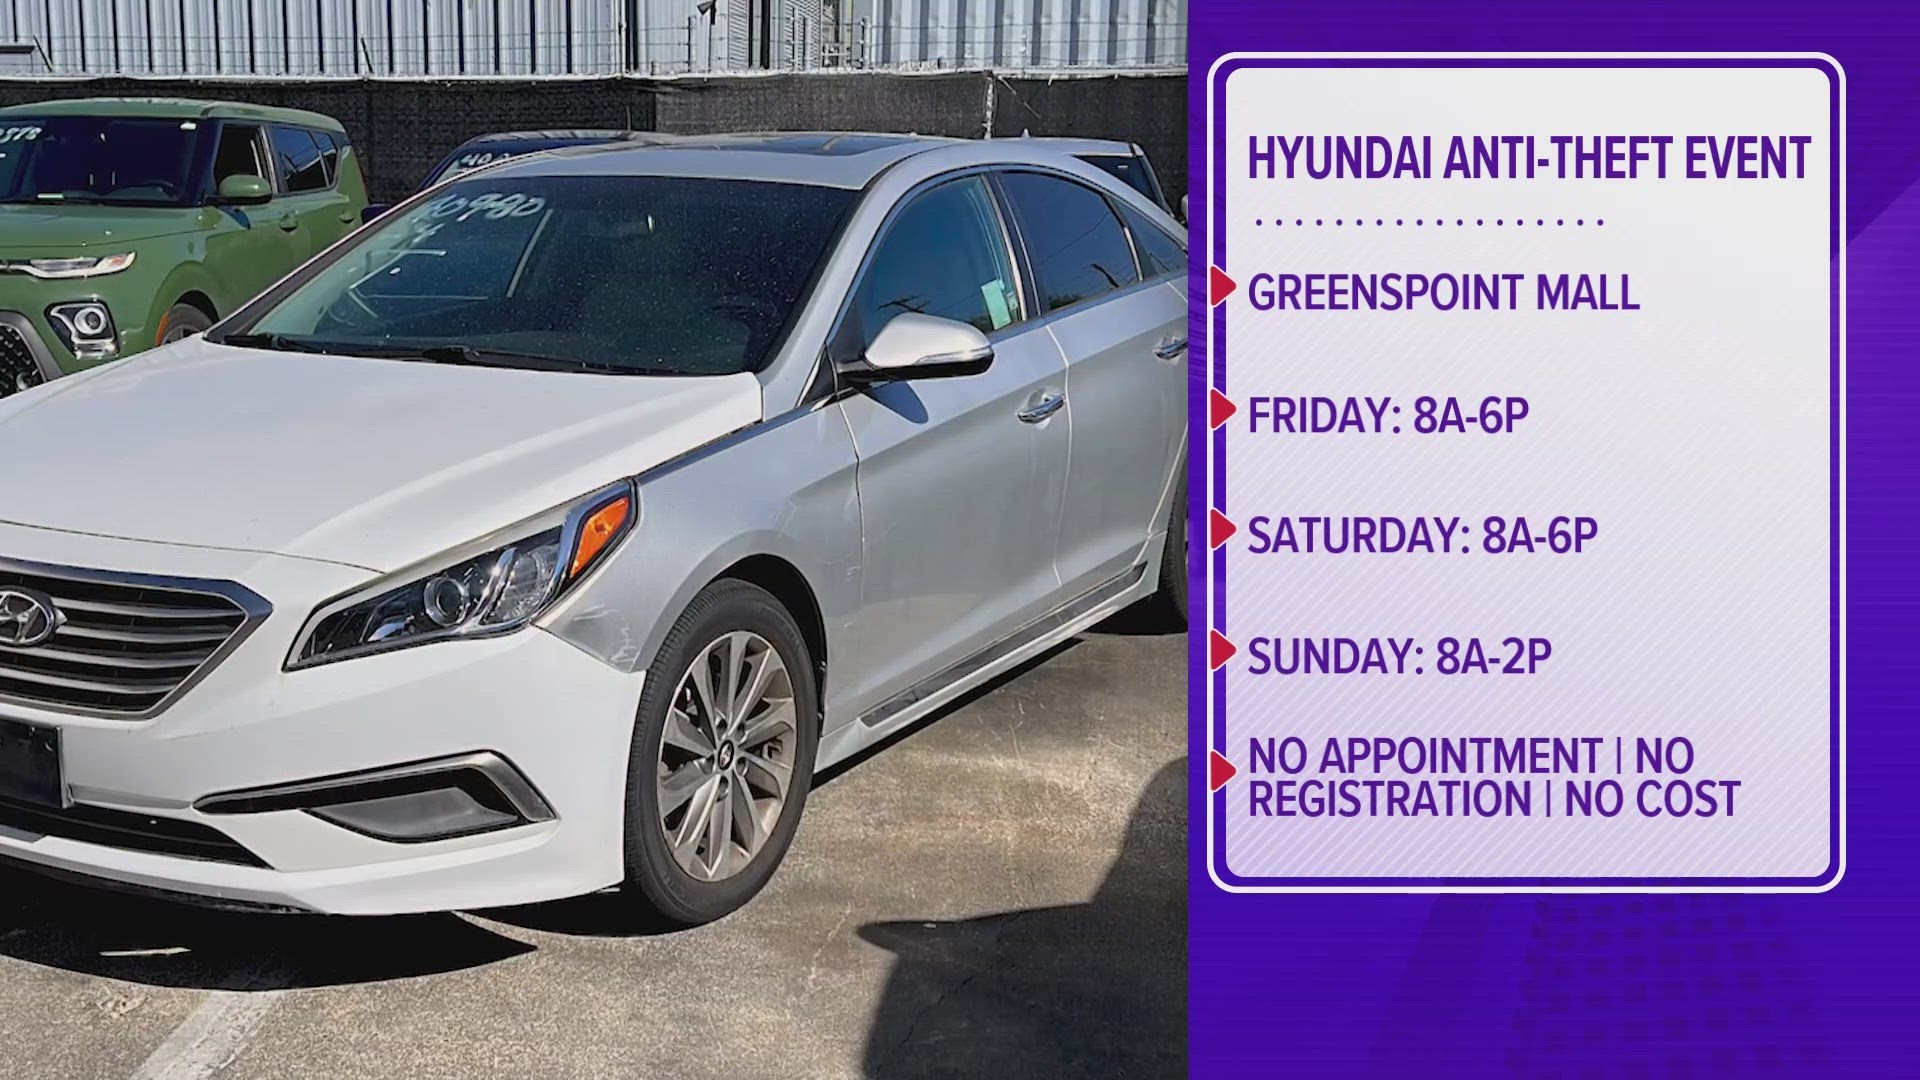 The Houston Police Department said the thefts of Hyundais have been on the rise for the past two years in Houston.